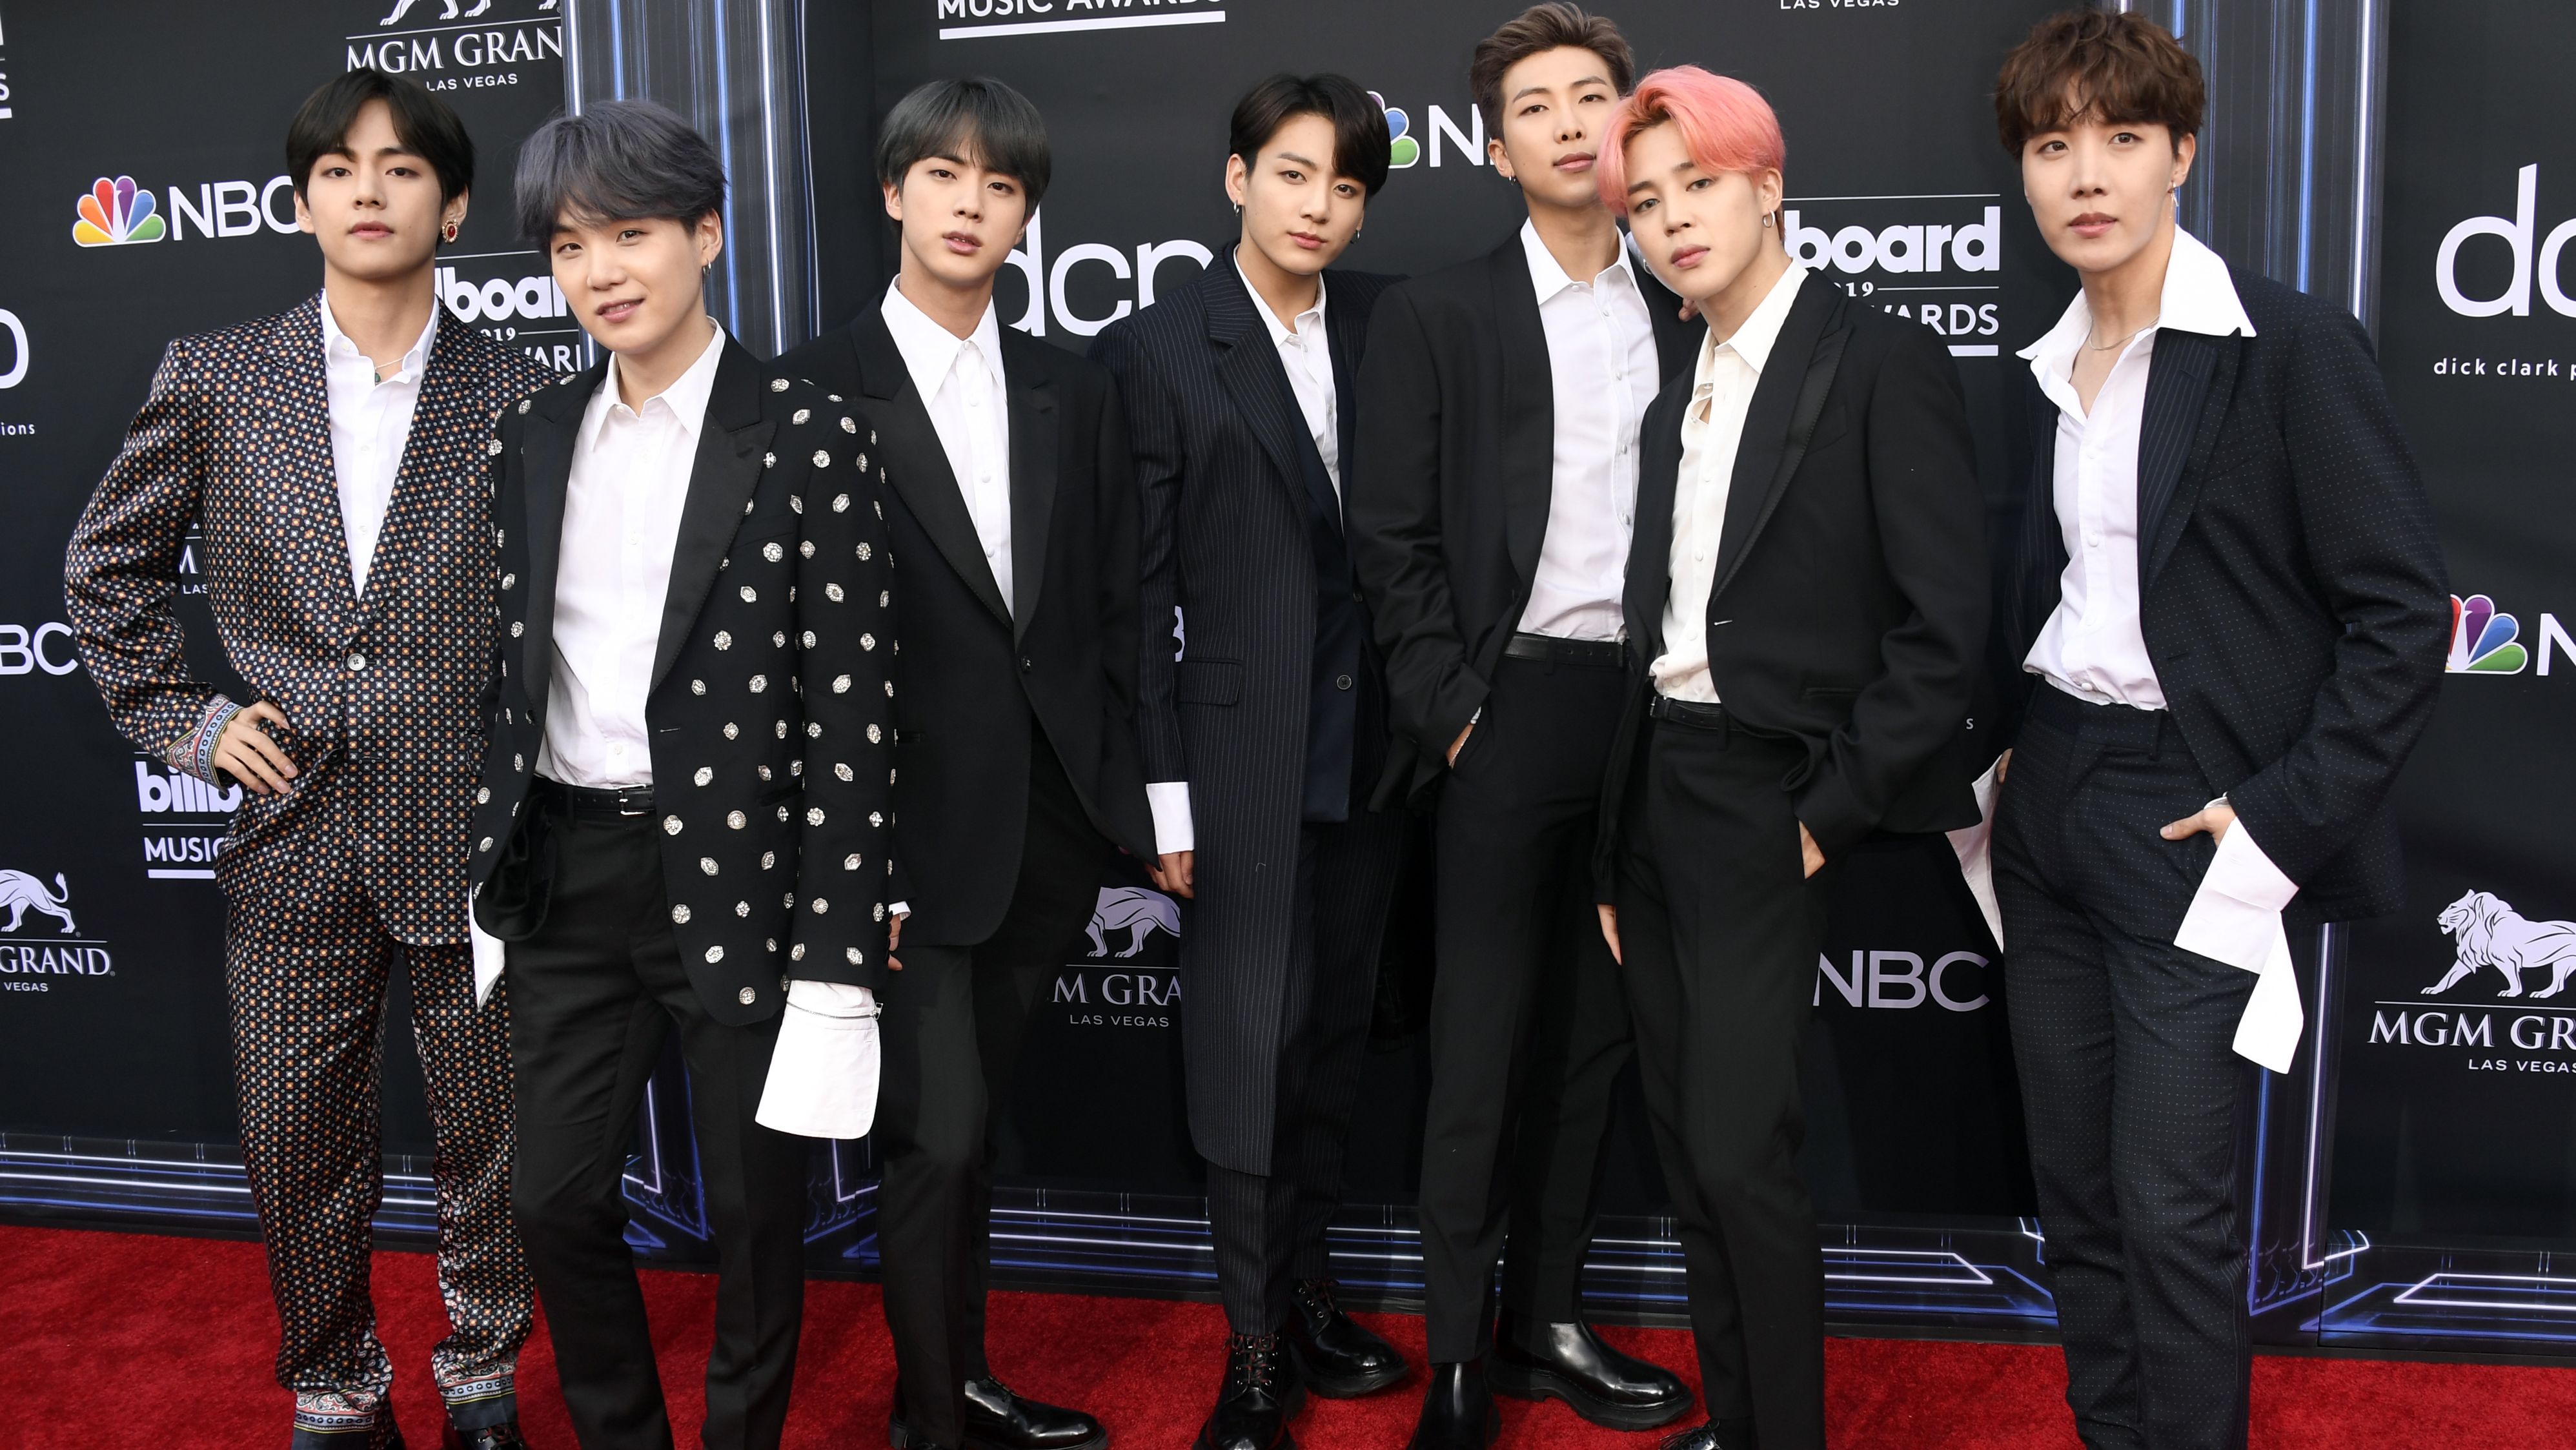 BTS attend the 2019 Billboard Music Awards at MGM Grand Garden Arena in Las Vegas on May 1, 2019.